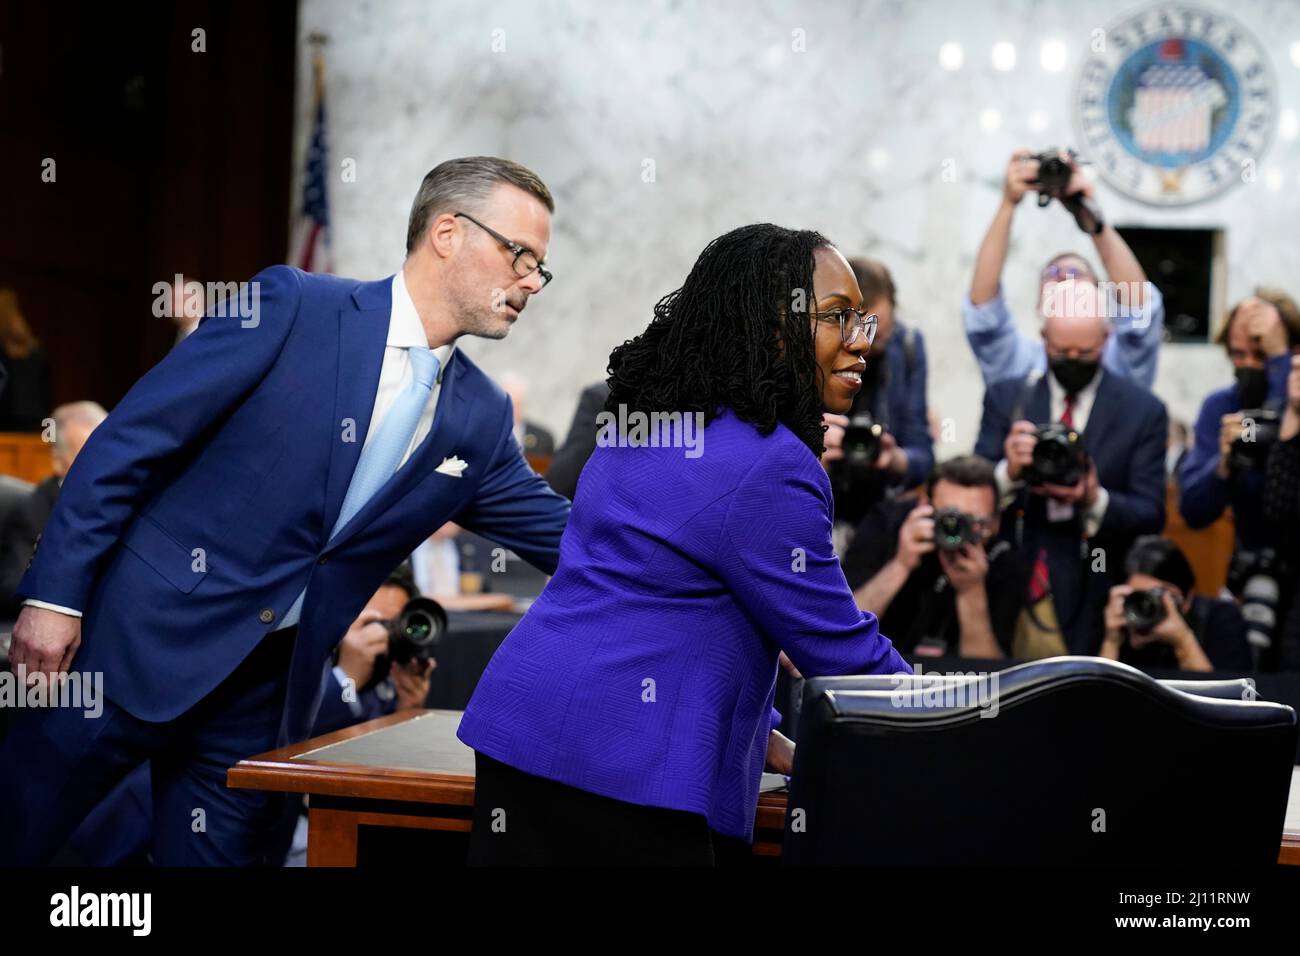 Supreme Court nominee Ketanji Brown Jackson and her husband Dr. Patrick Jackson return from a break in her Senate Judiciary Committee confirmation hearing on Capitol Hill in Washington, Monday, March 21, 2022.Credit: J. Scott Applewhite/Pool via CNP /MediaPunch Stock Photo